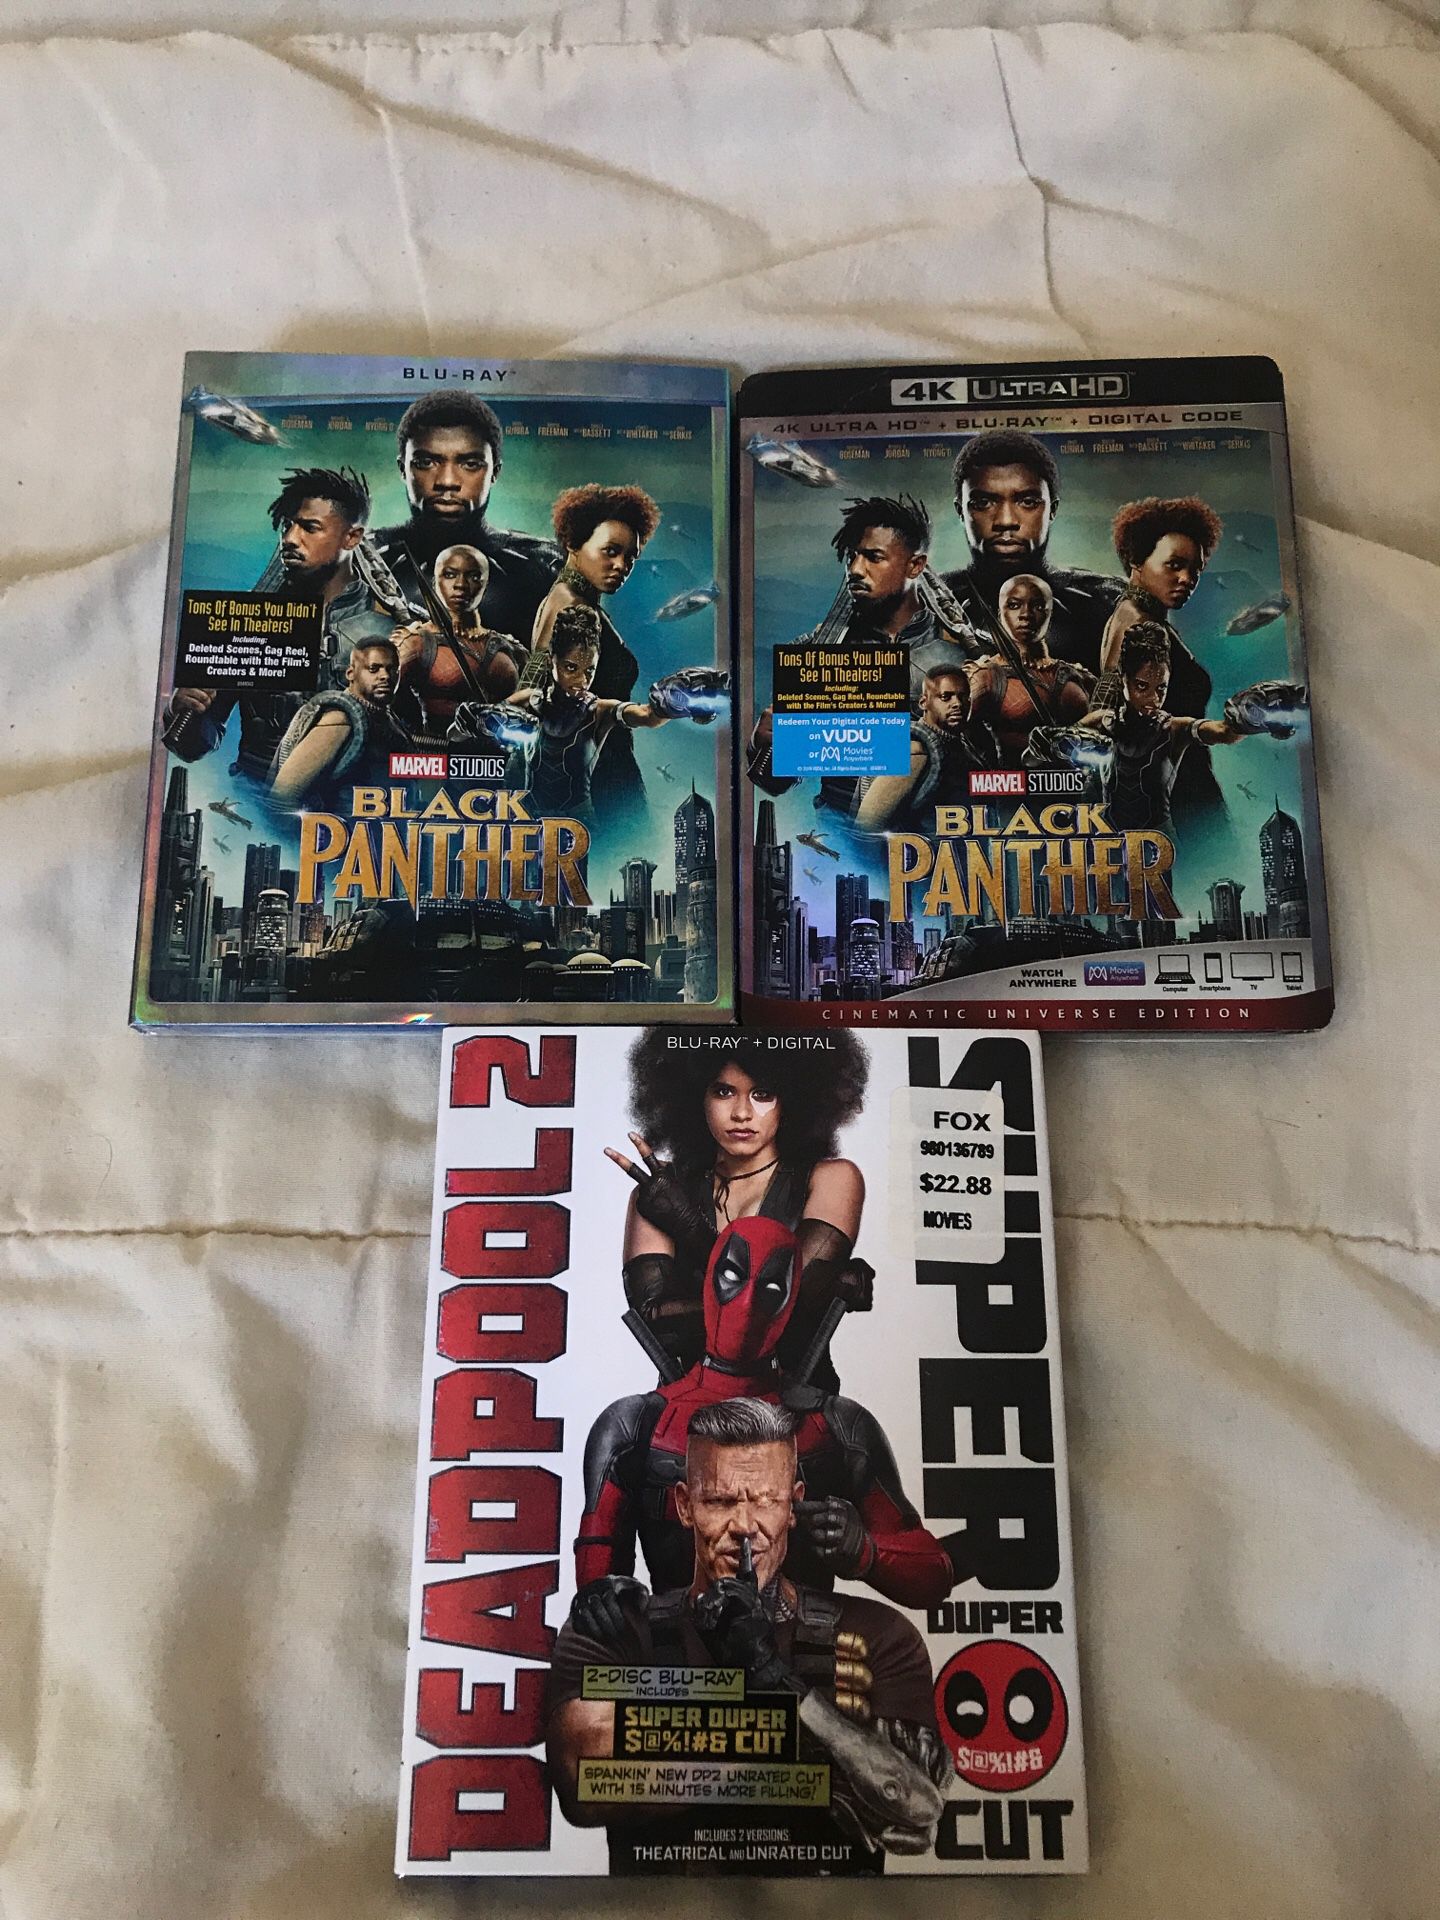 Black panther and Deadpool 2 movie discs